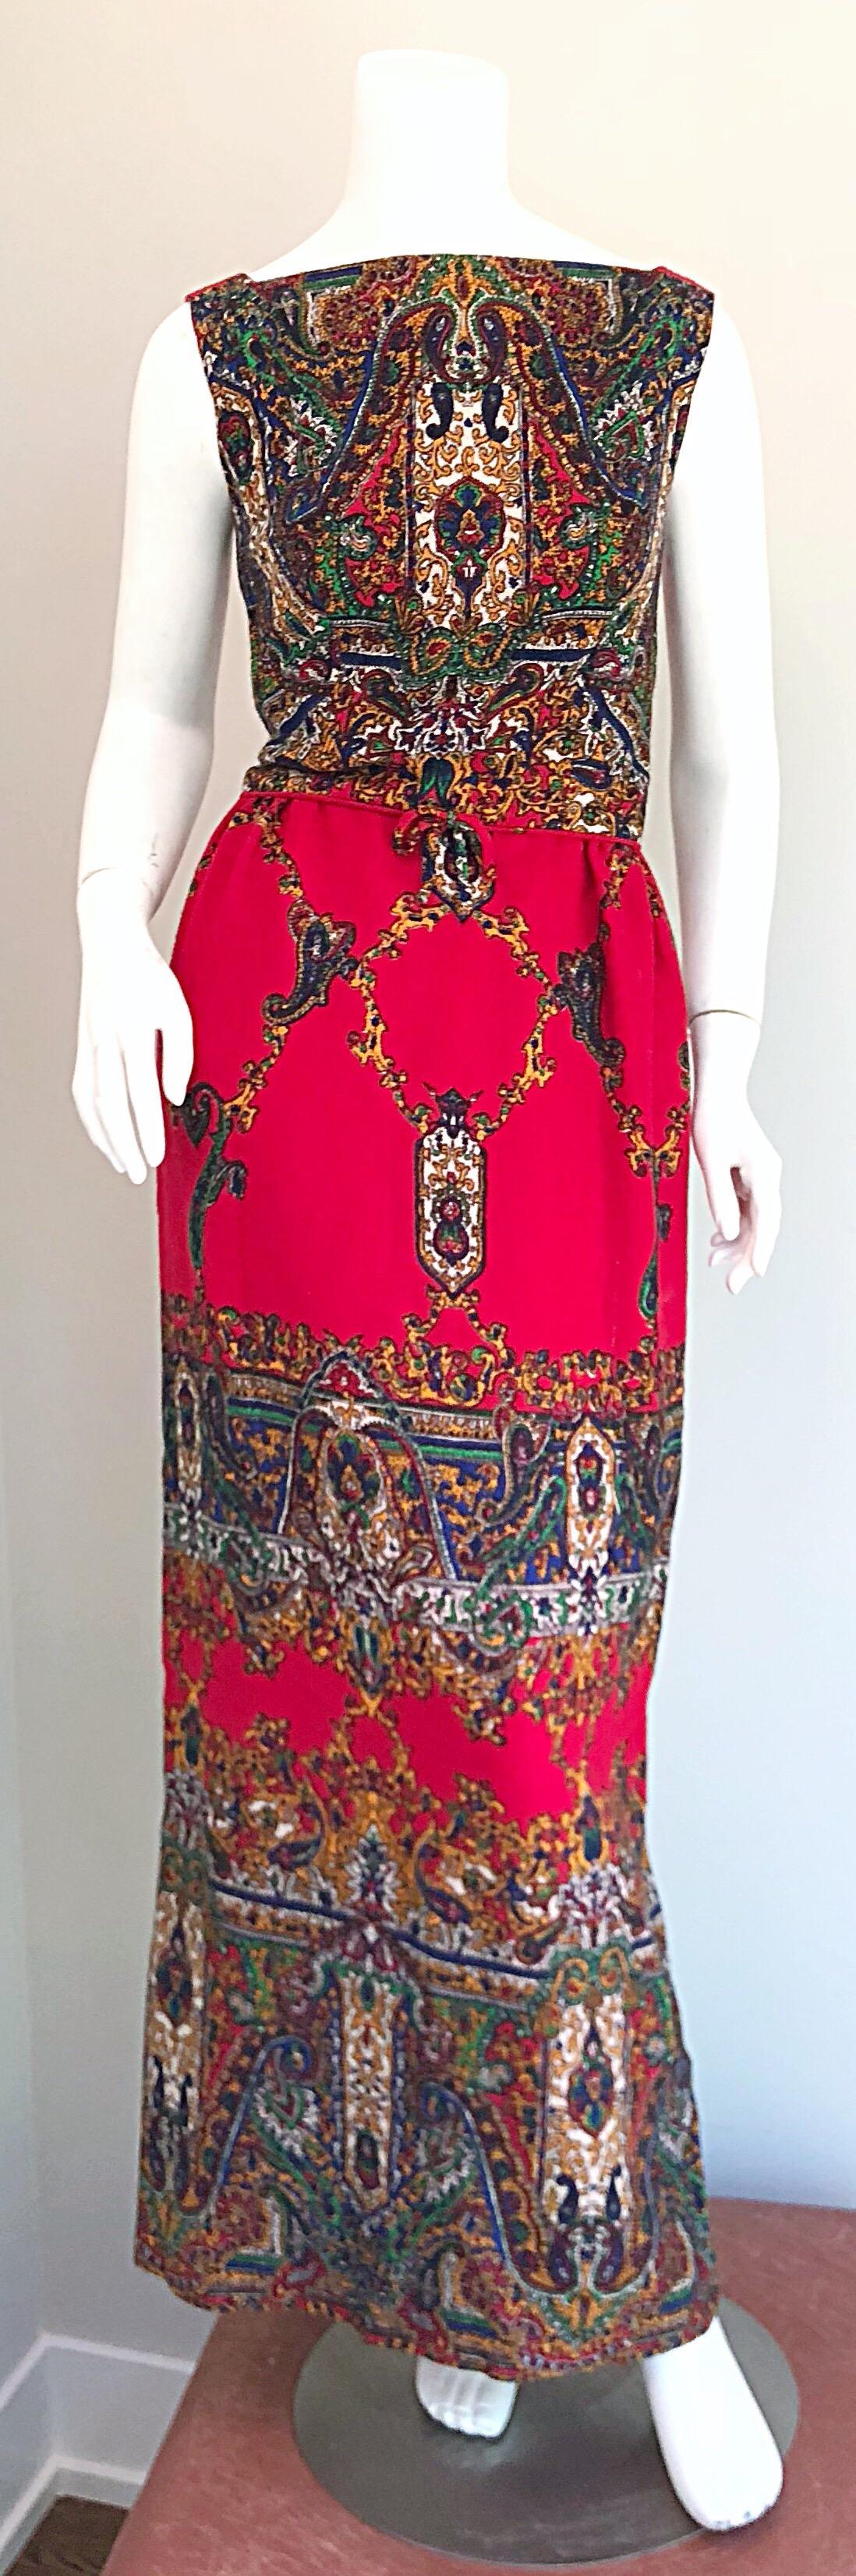 Fantastic Early 1970s Boho Chic Paisley Print Vintage Red 70s Maxi Dress For Sale 5